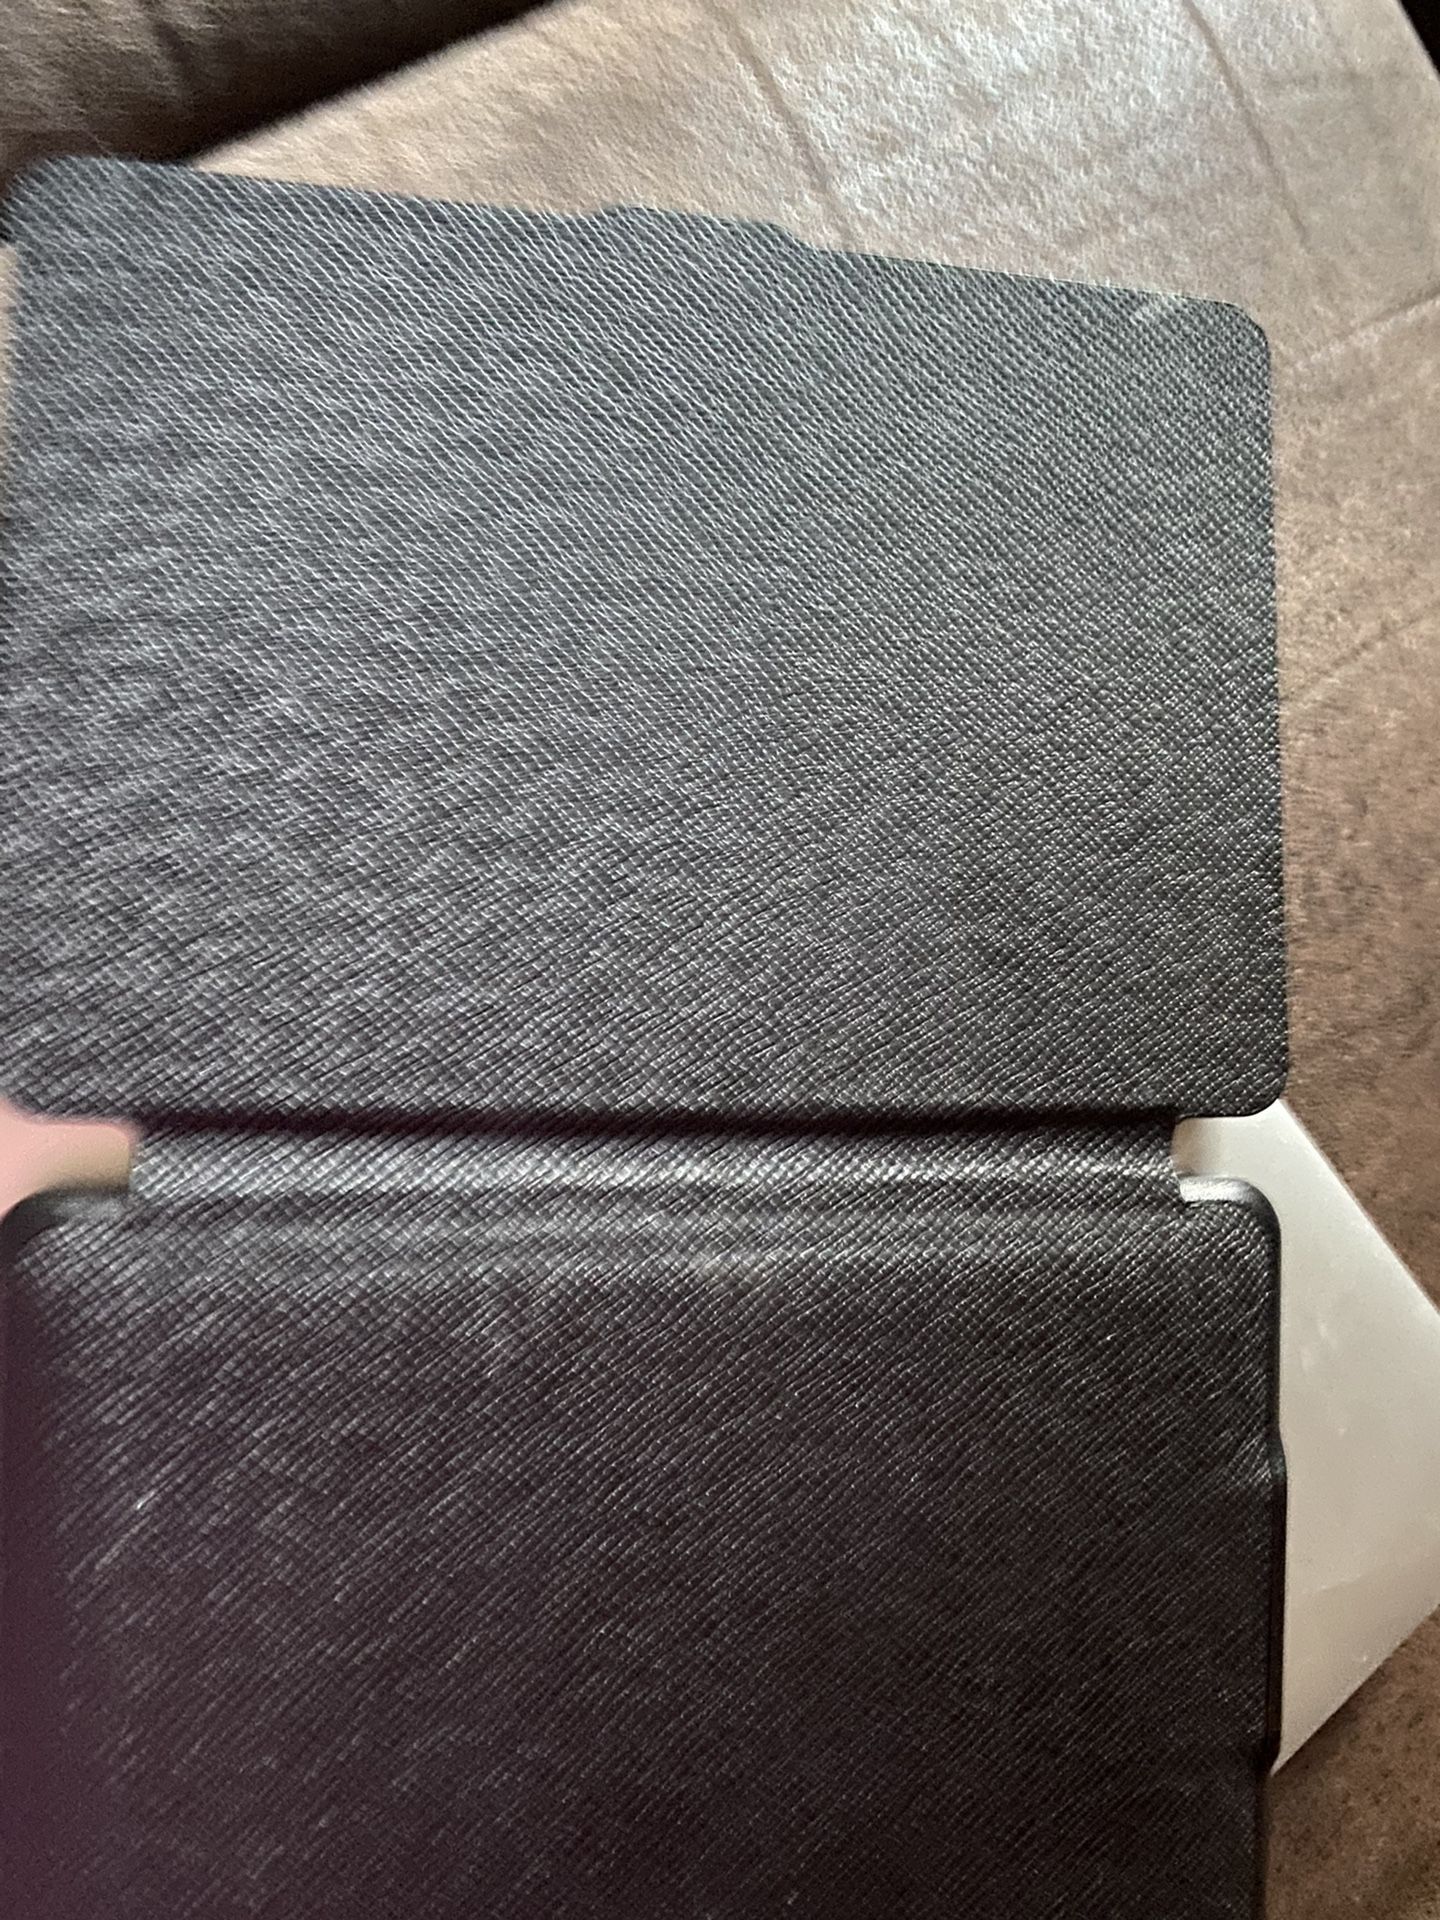 KINDLE PAPER WHITE 2 ALMOST NEW COMES WITH CASE